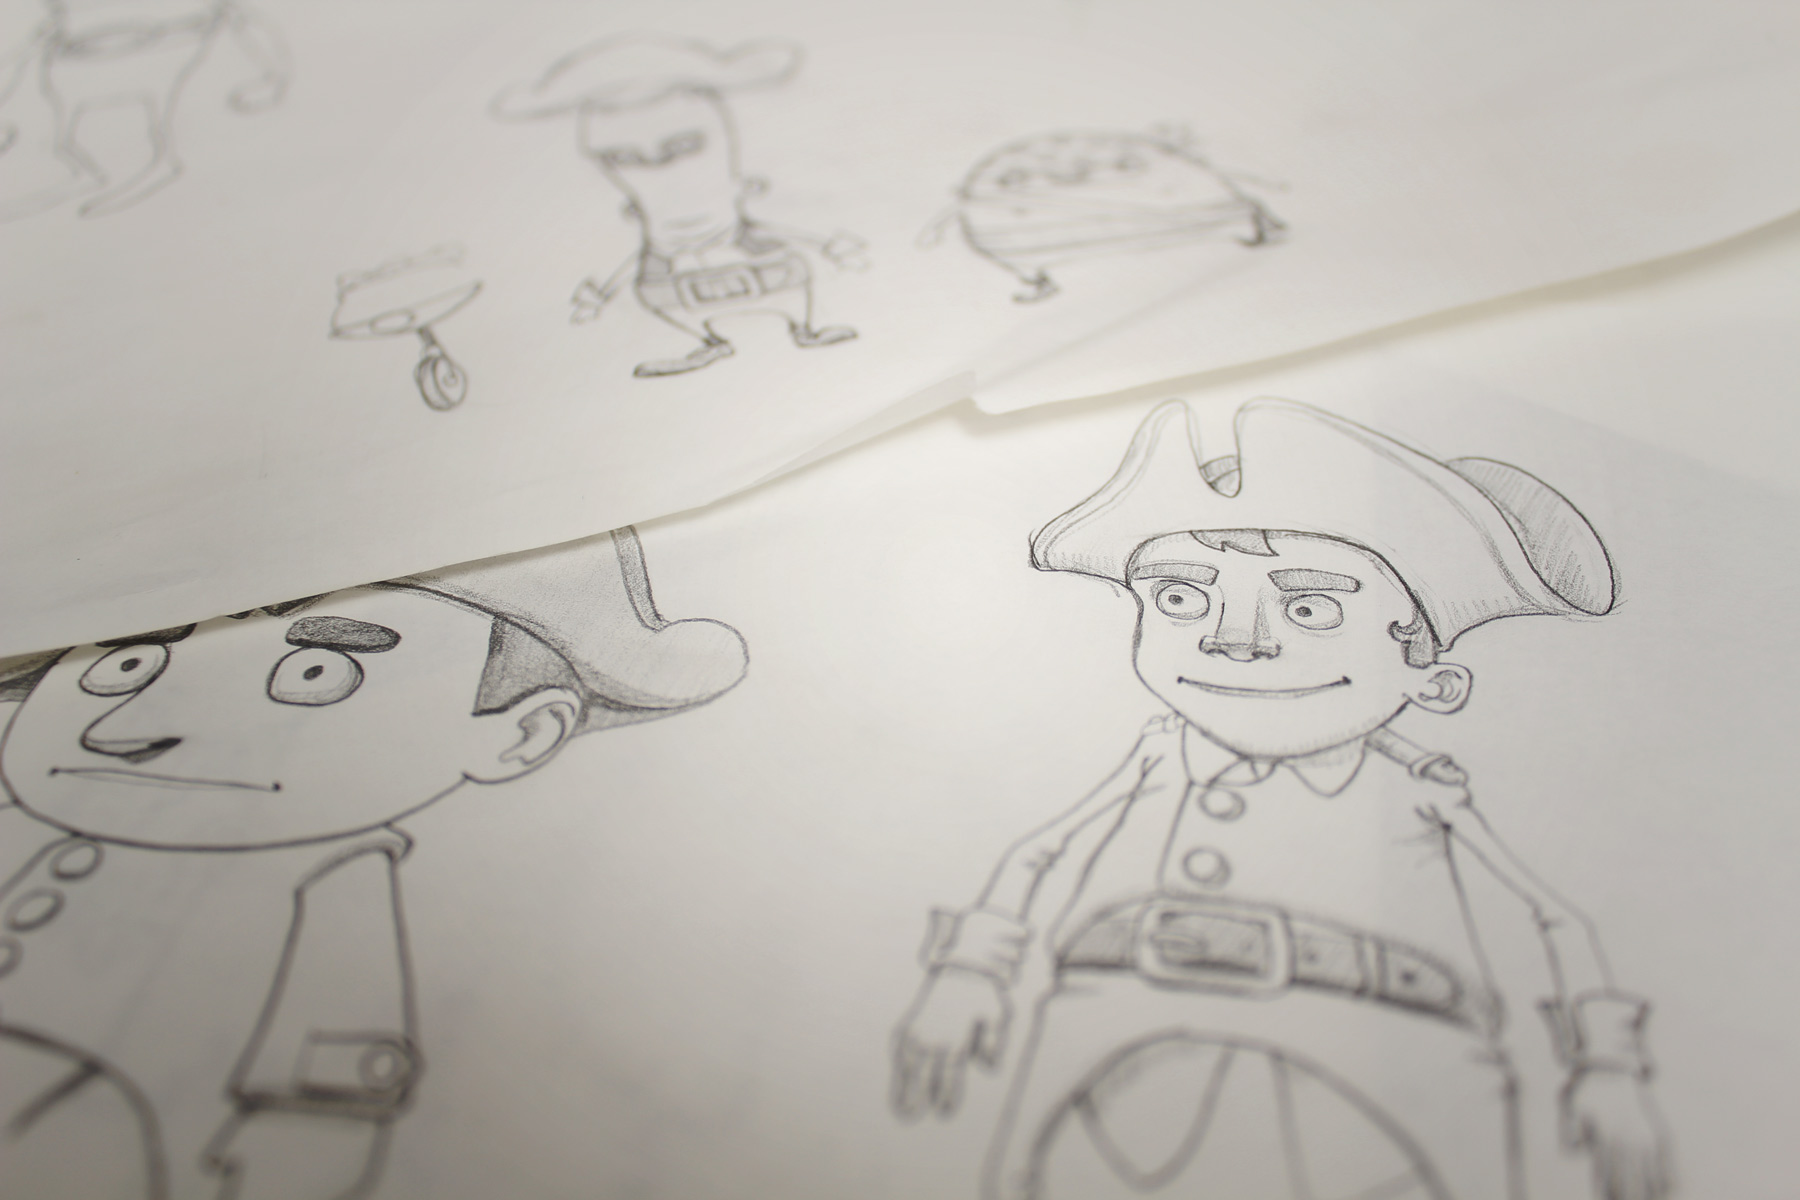 After creating the concept of a pirate adventure, we set about drawing up the plot heroes and villains.